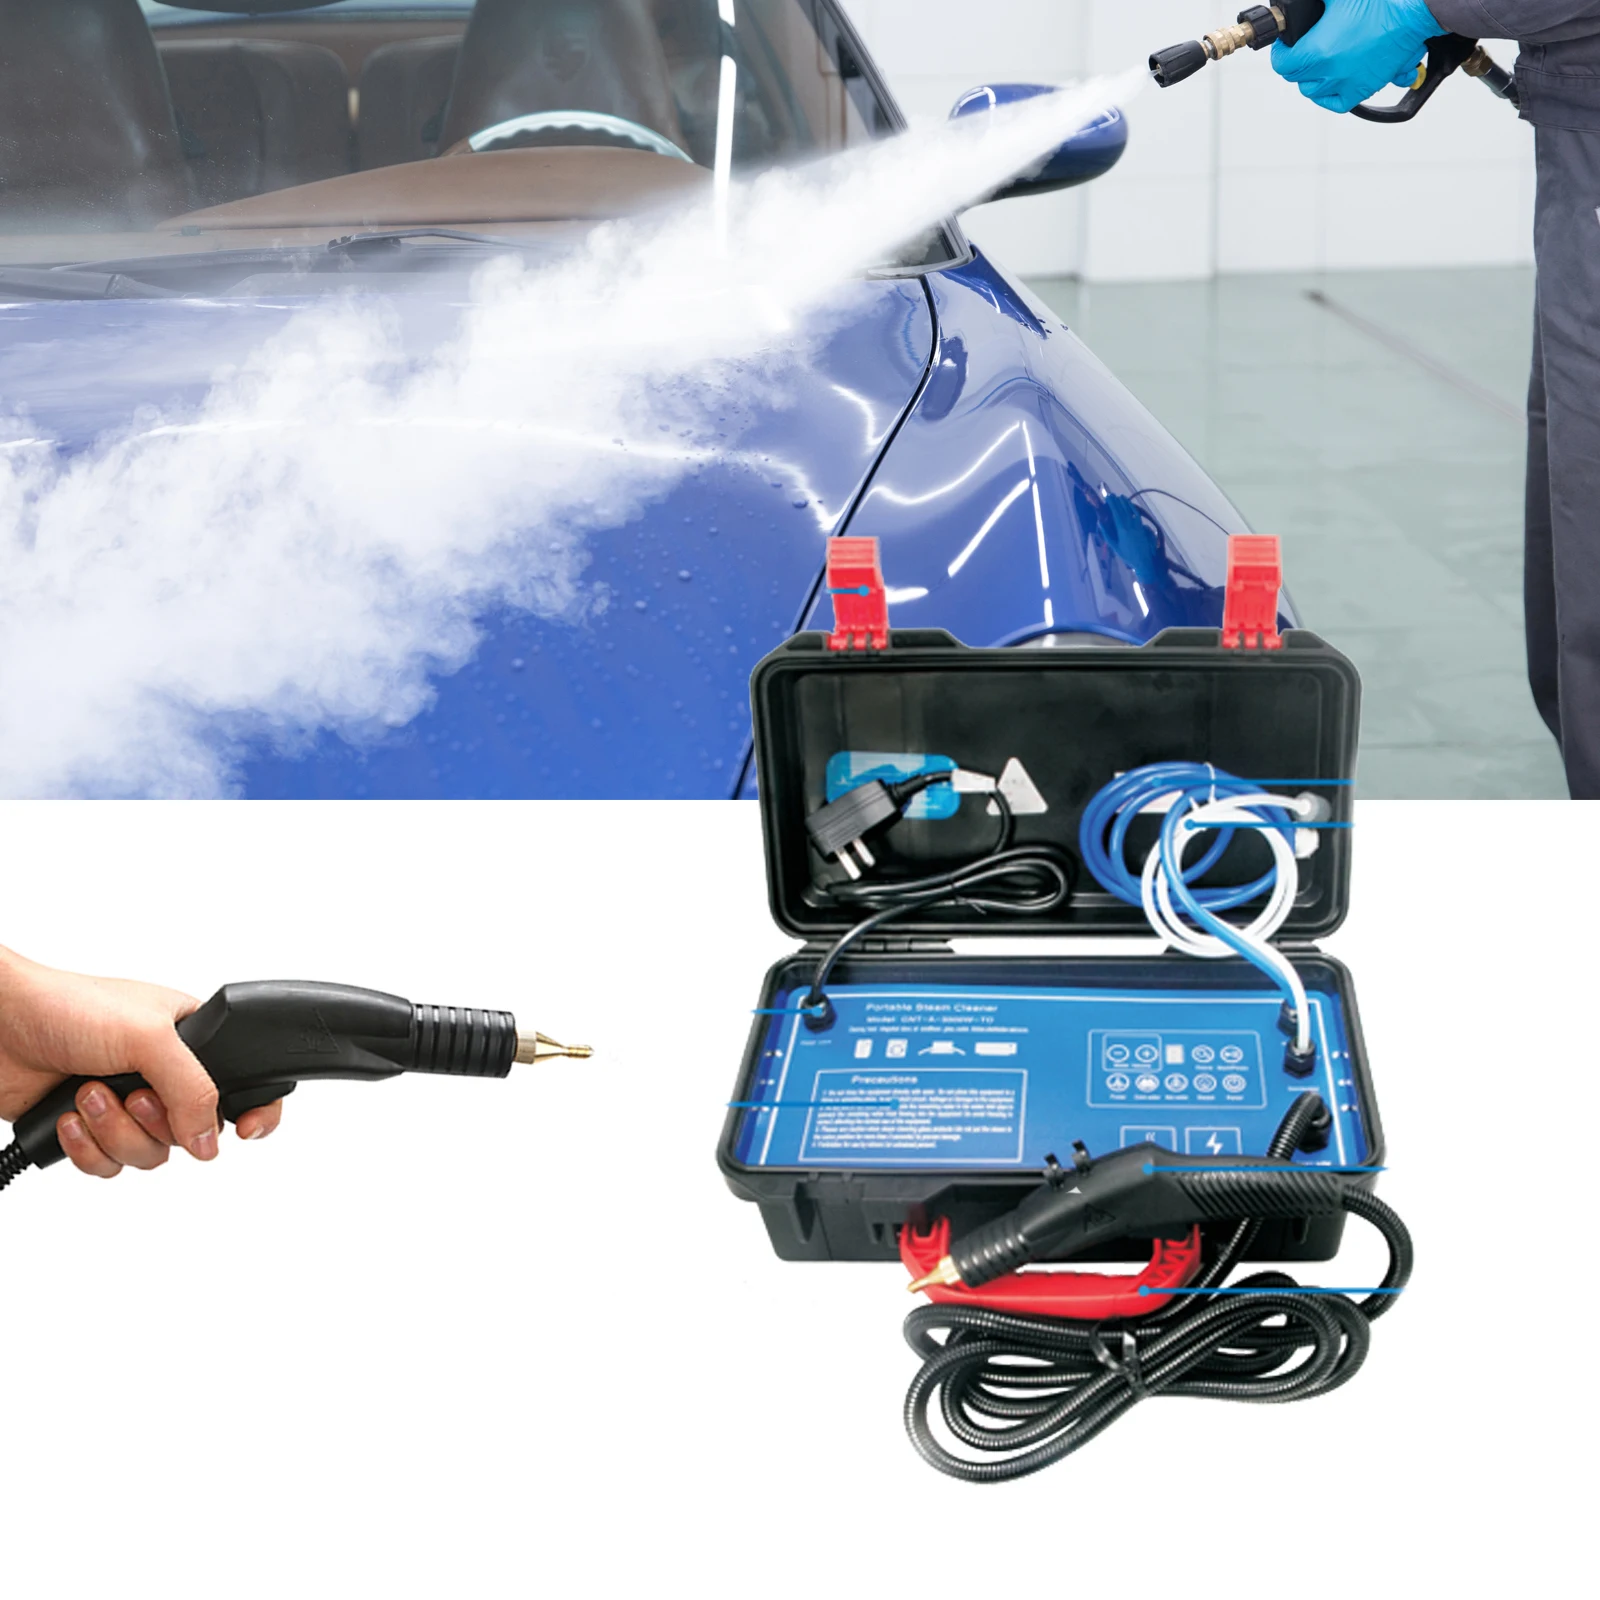 Professional home car wash machine car use cleaning steamer portable pre... - $431.29